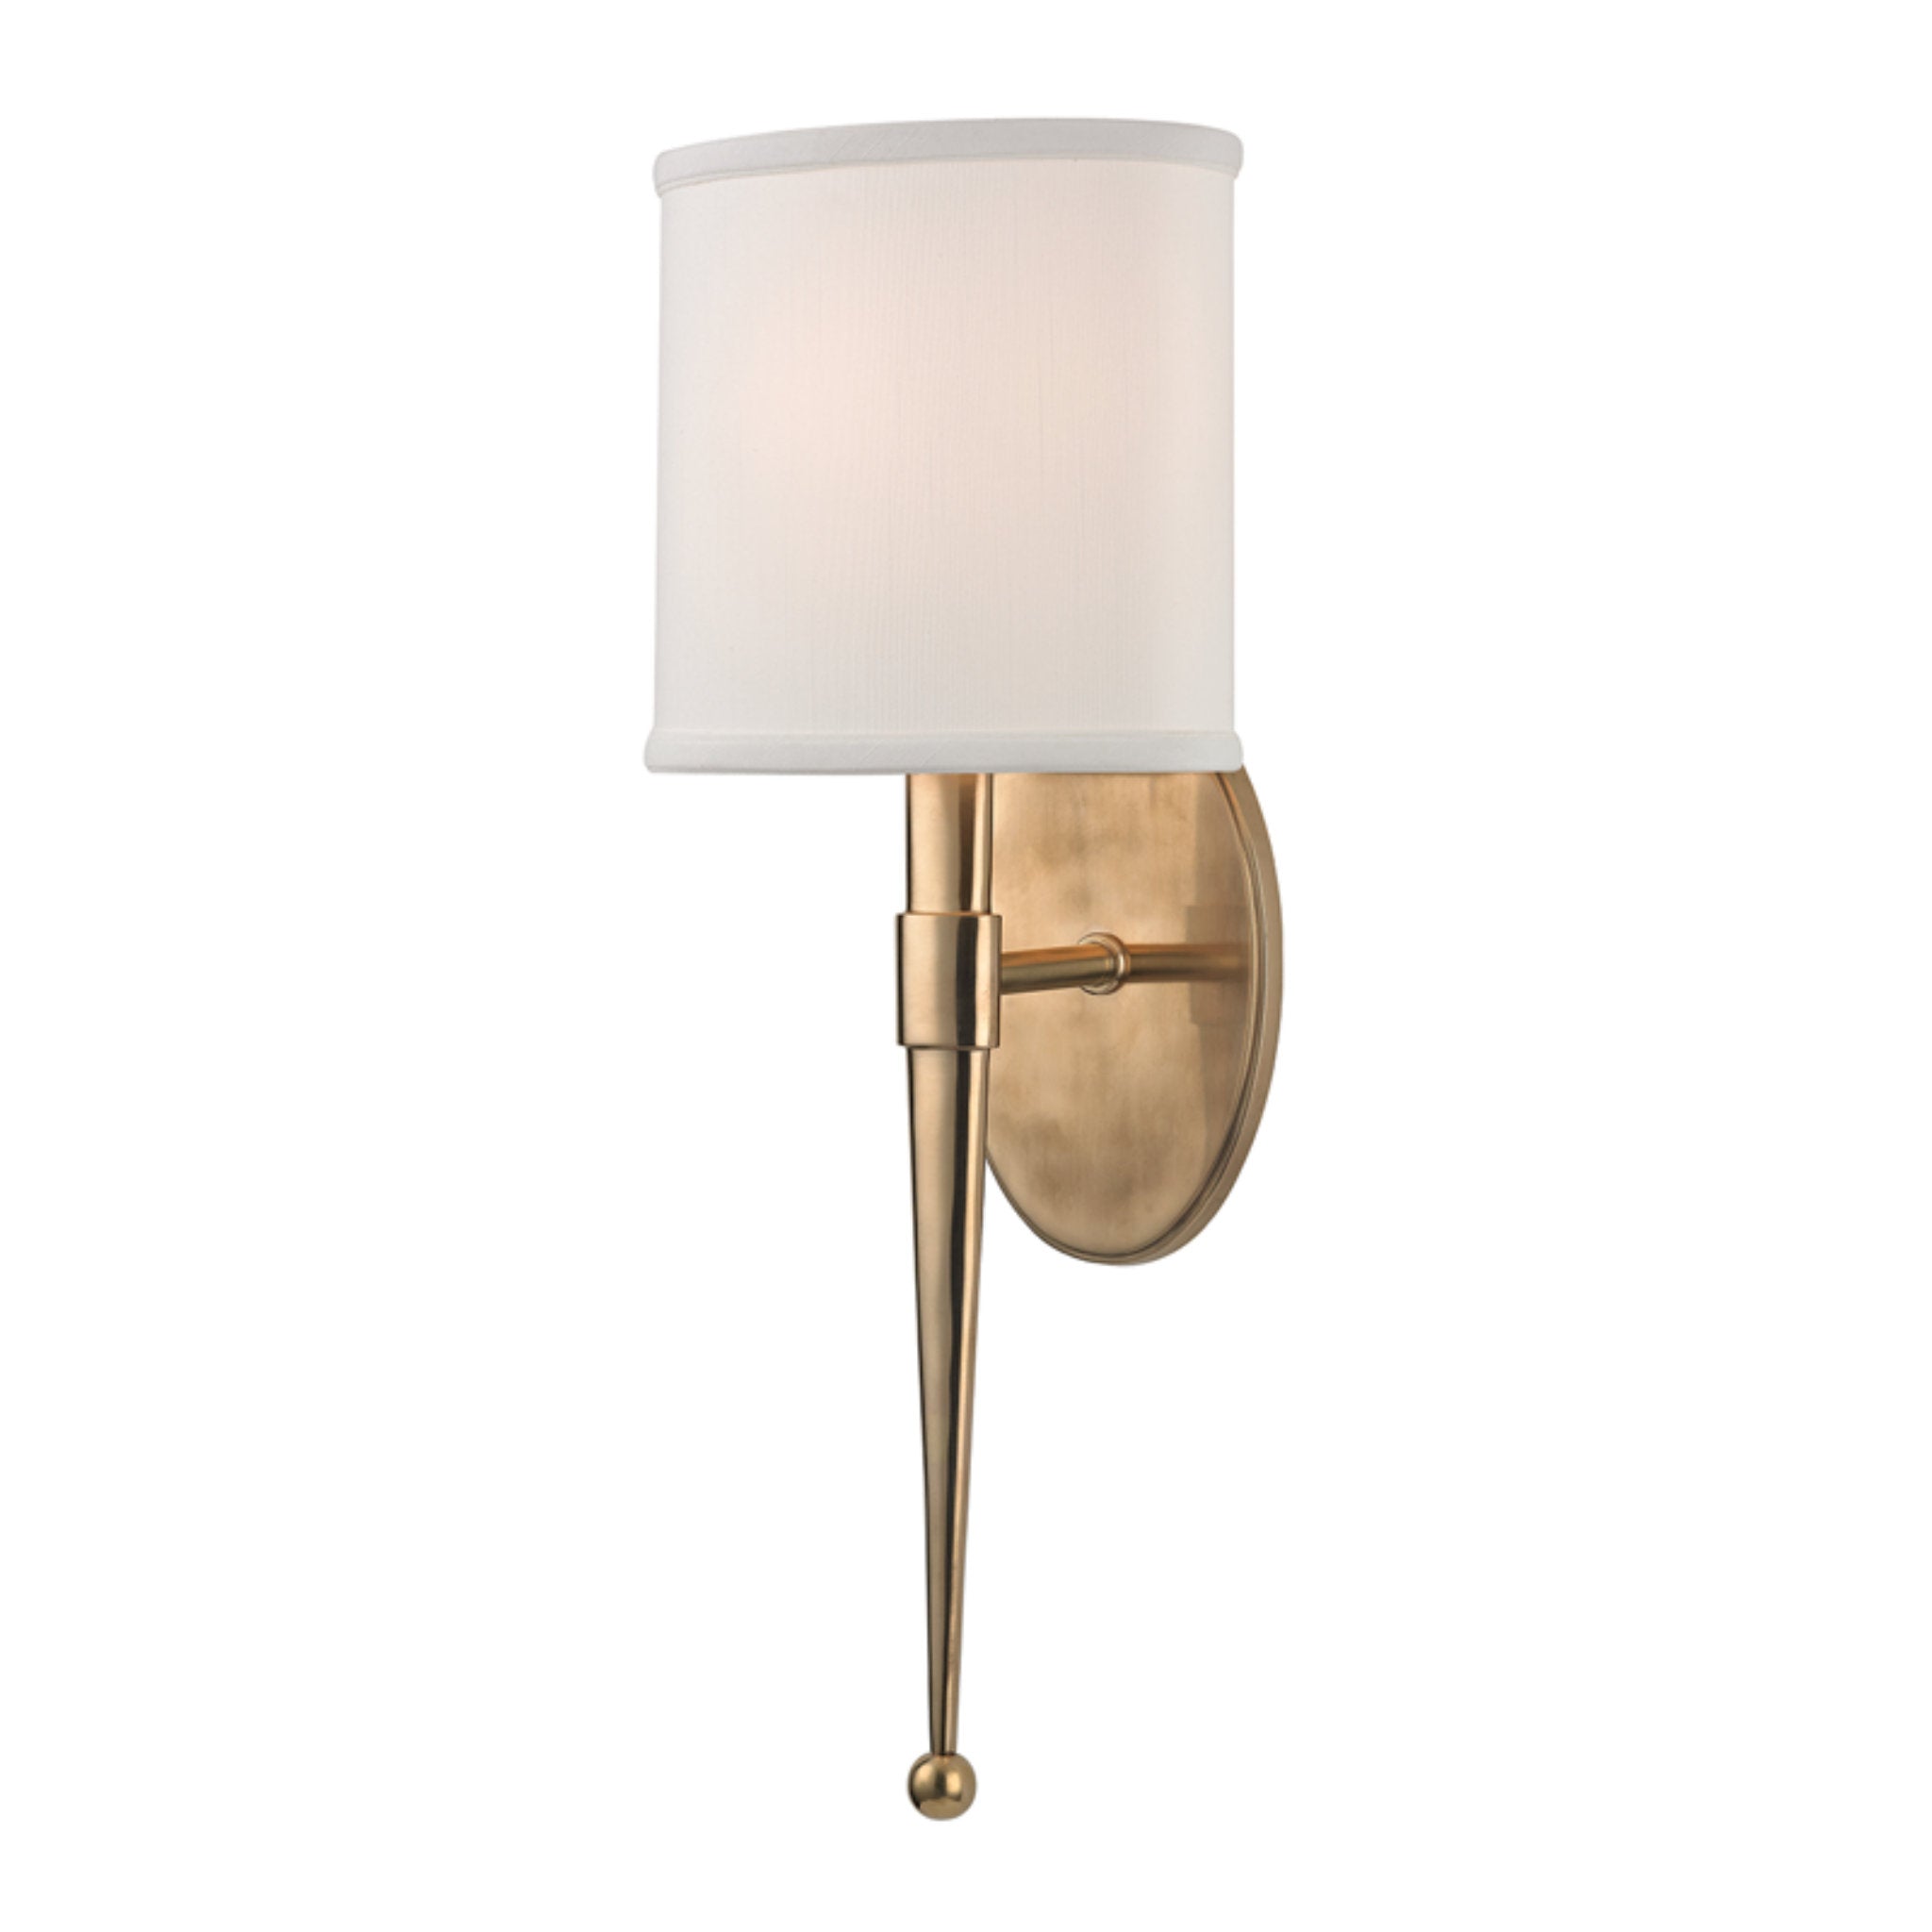 Madison 1 Light Wall Sconce in Aged Brass